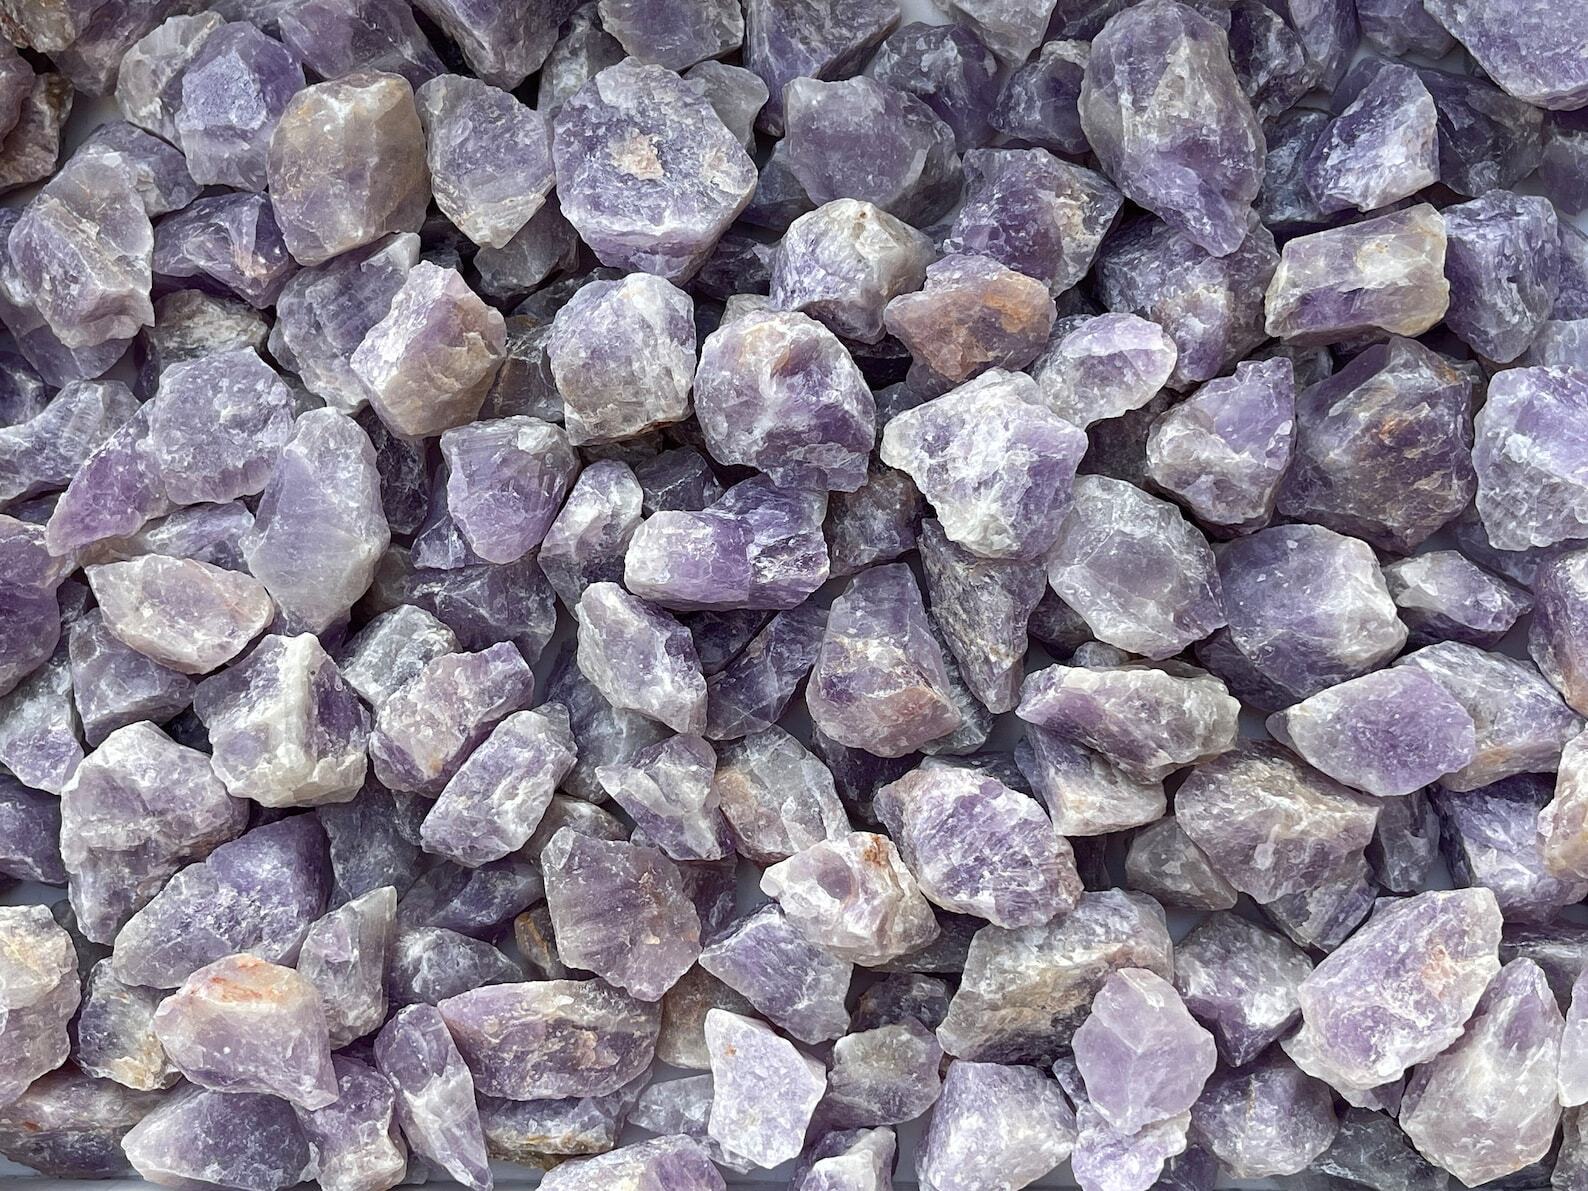 Wholesale Raw Crystal Stones, Natural Rough Stones, More Than 40+ Type to choose